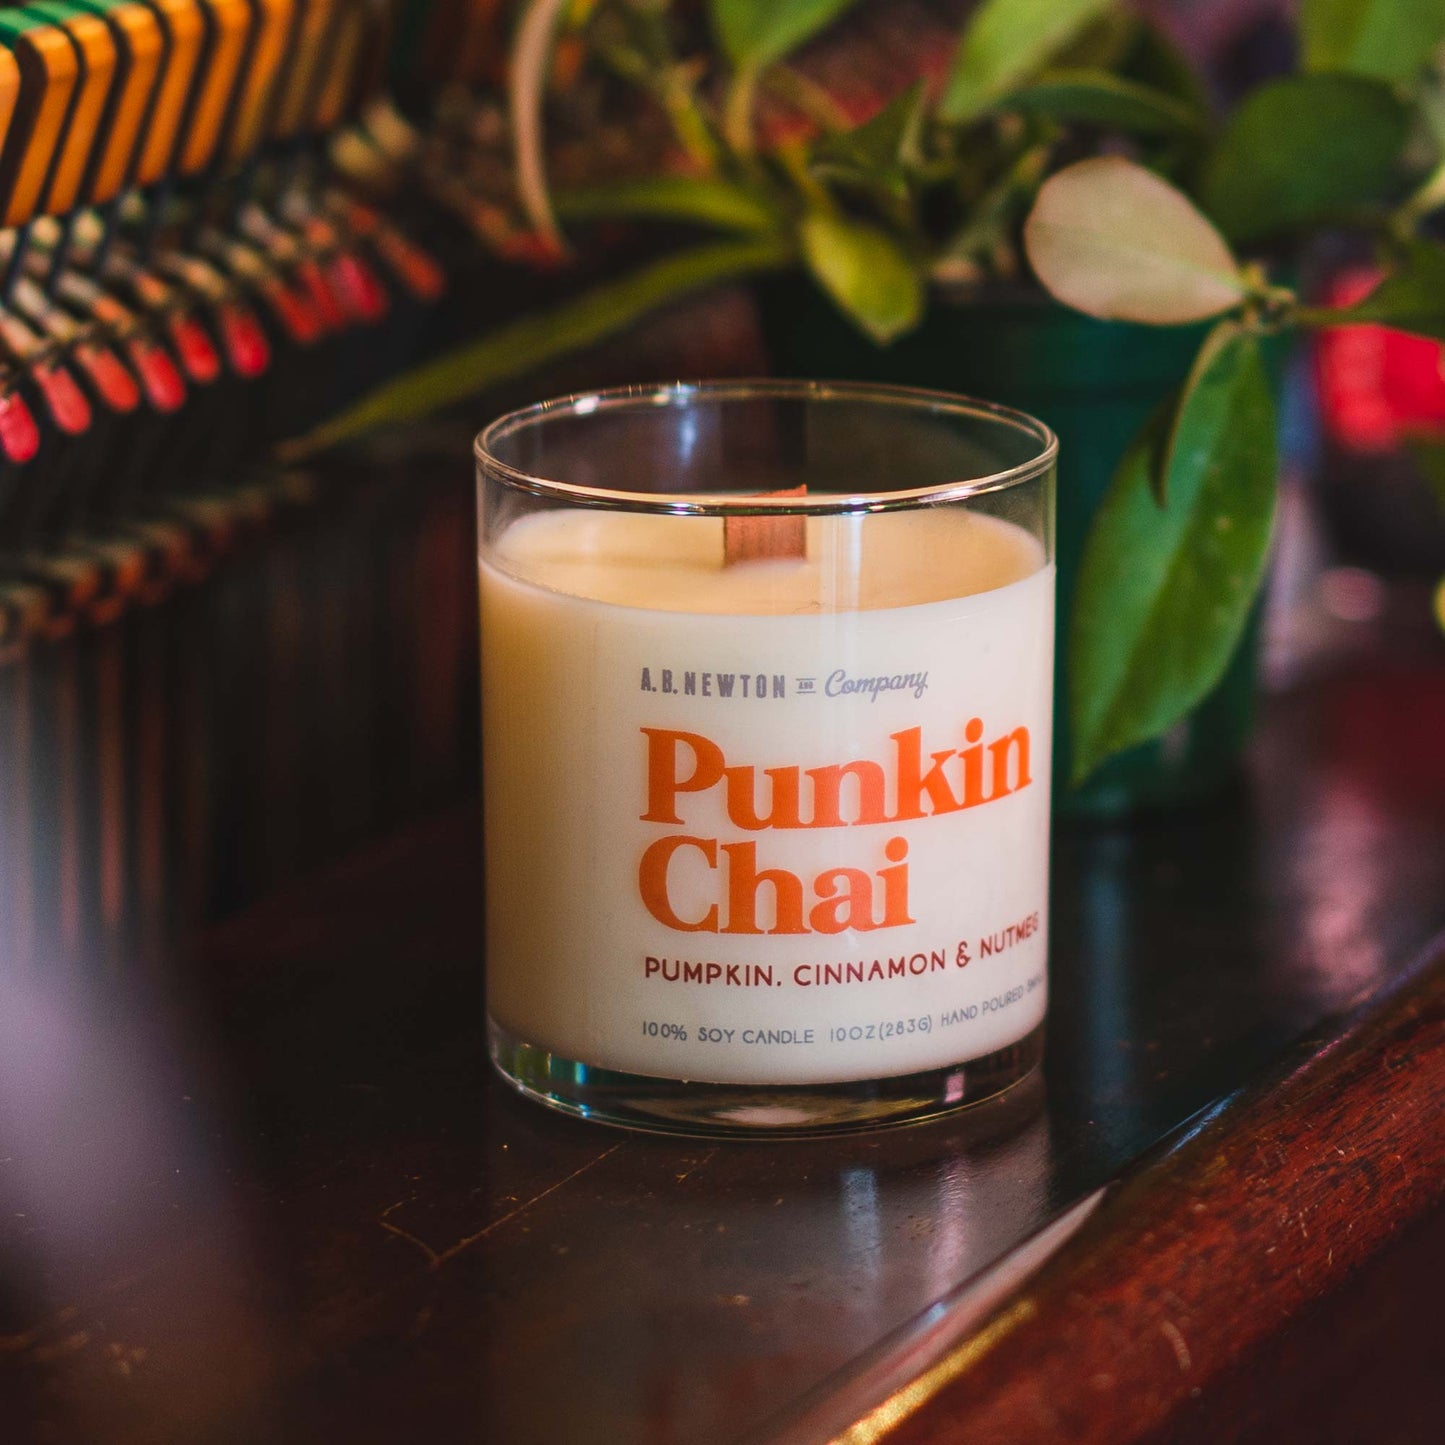 Punkin Chai Scented Soy Candle Hand Poured Small Batch